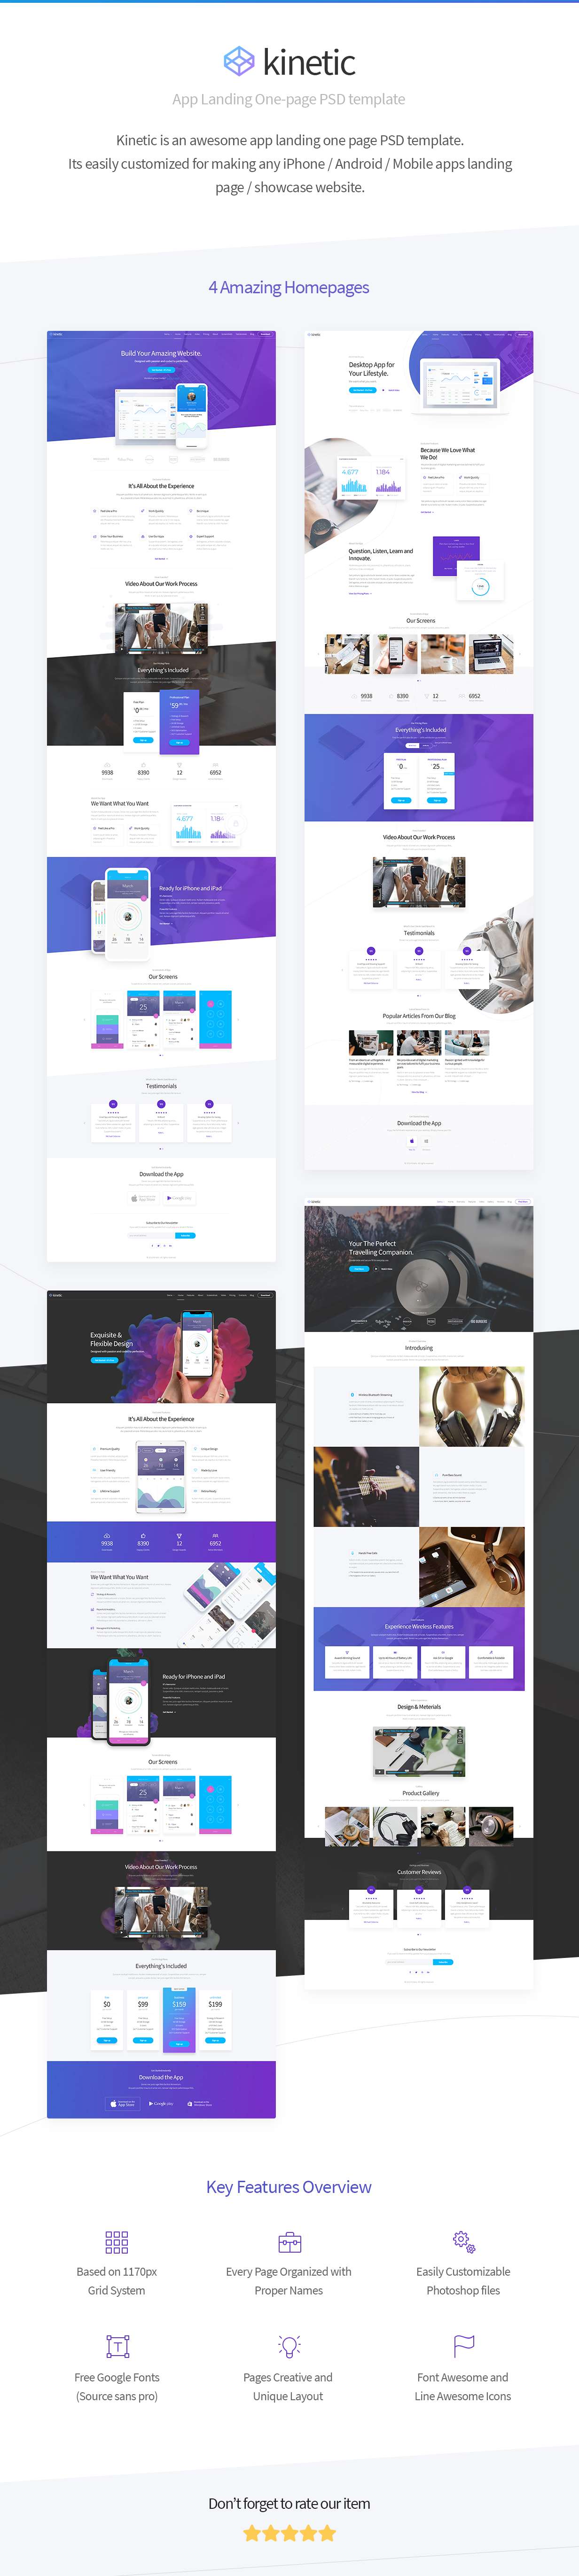 Kinetic - App Landing One Page PSD Template - 1